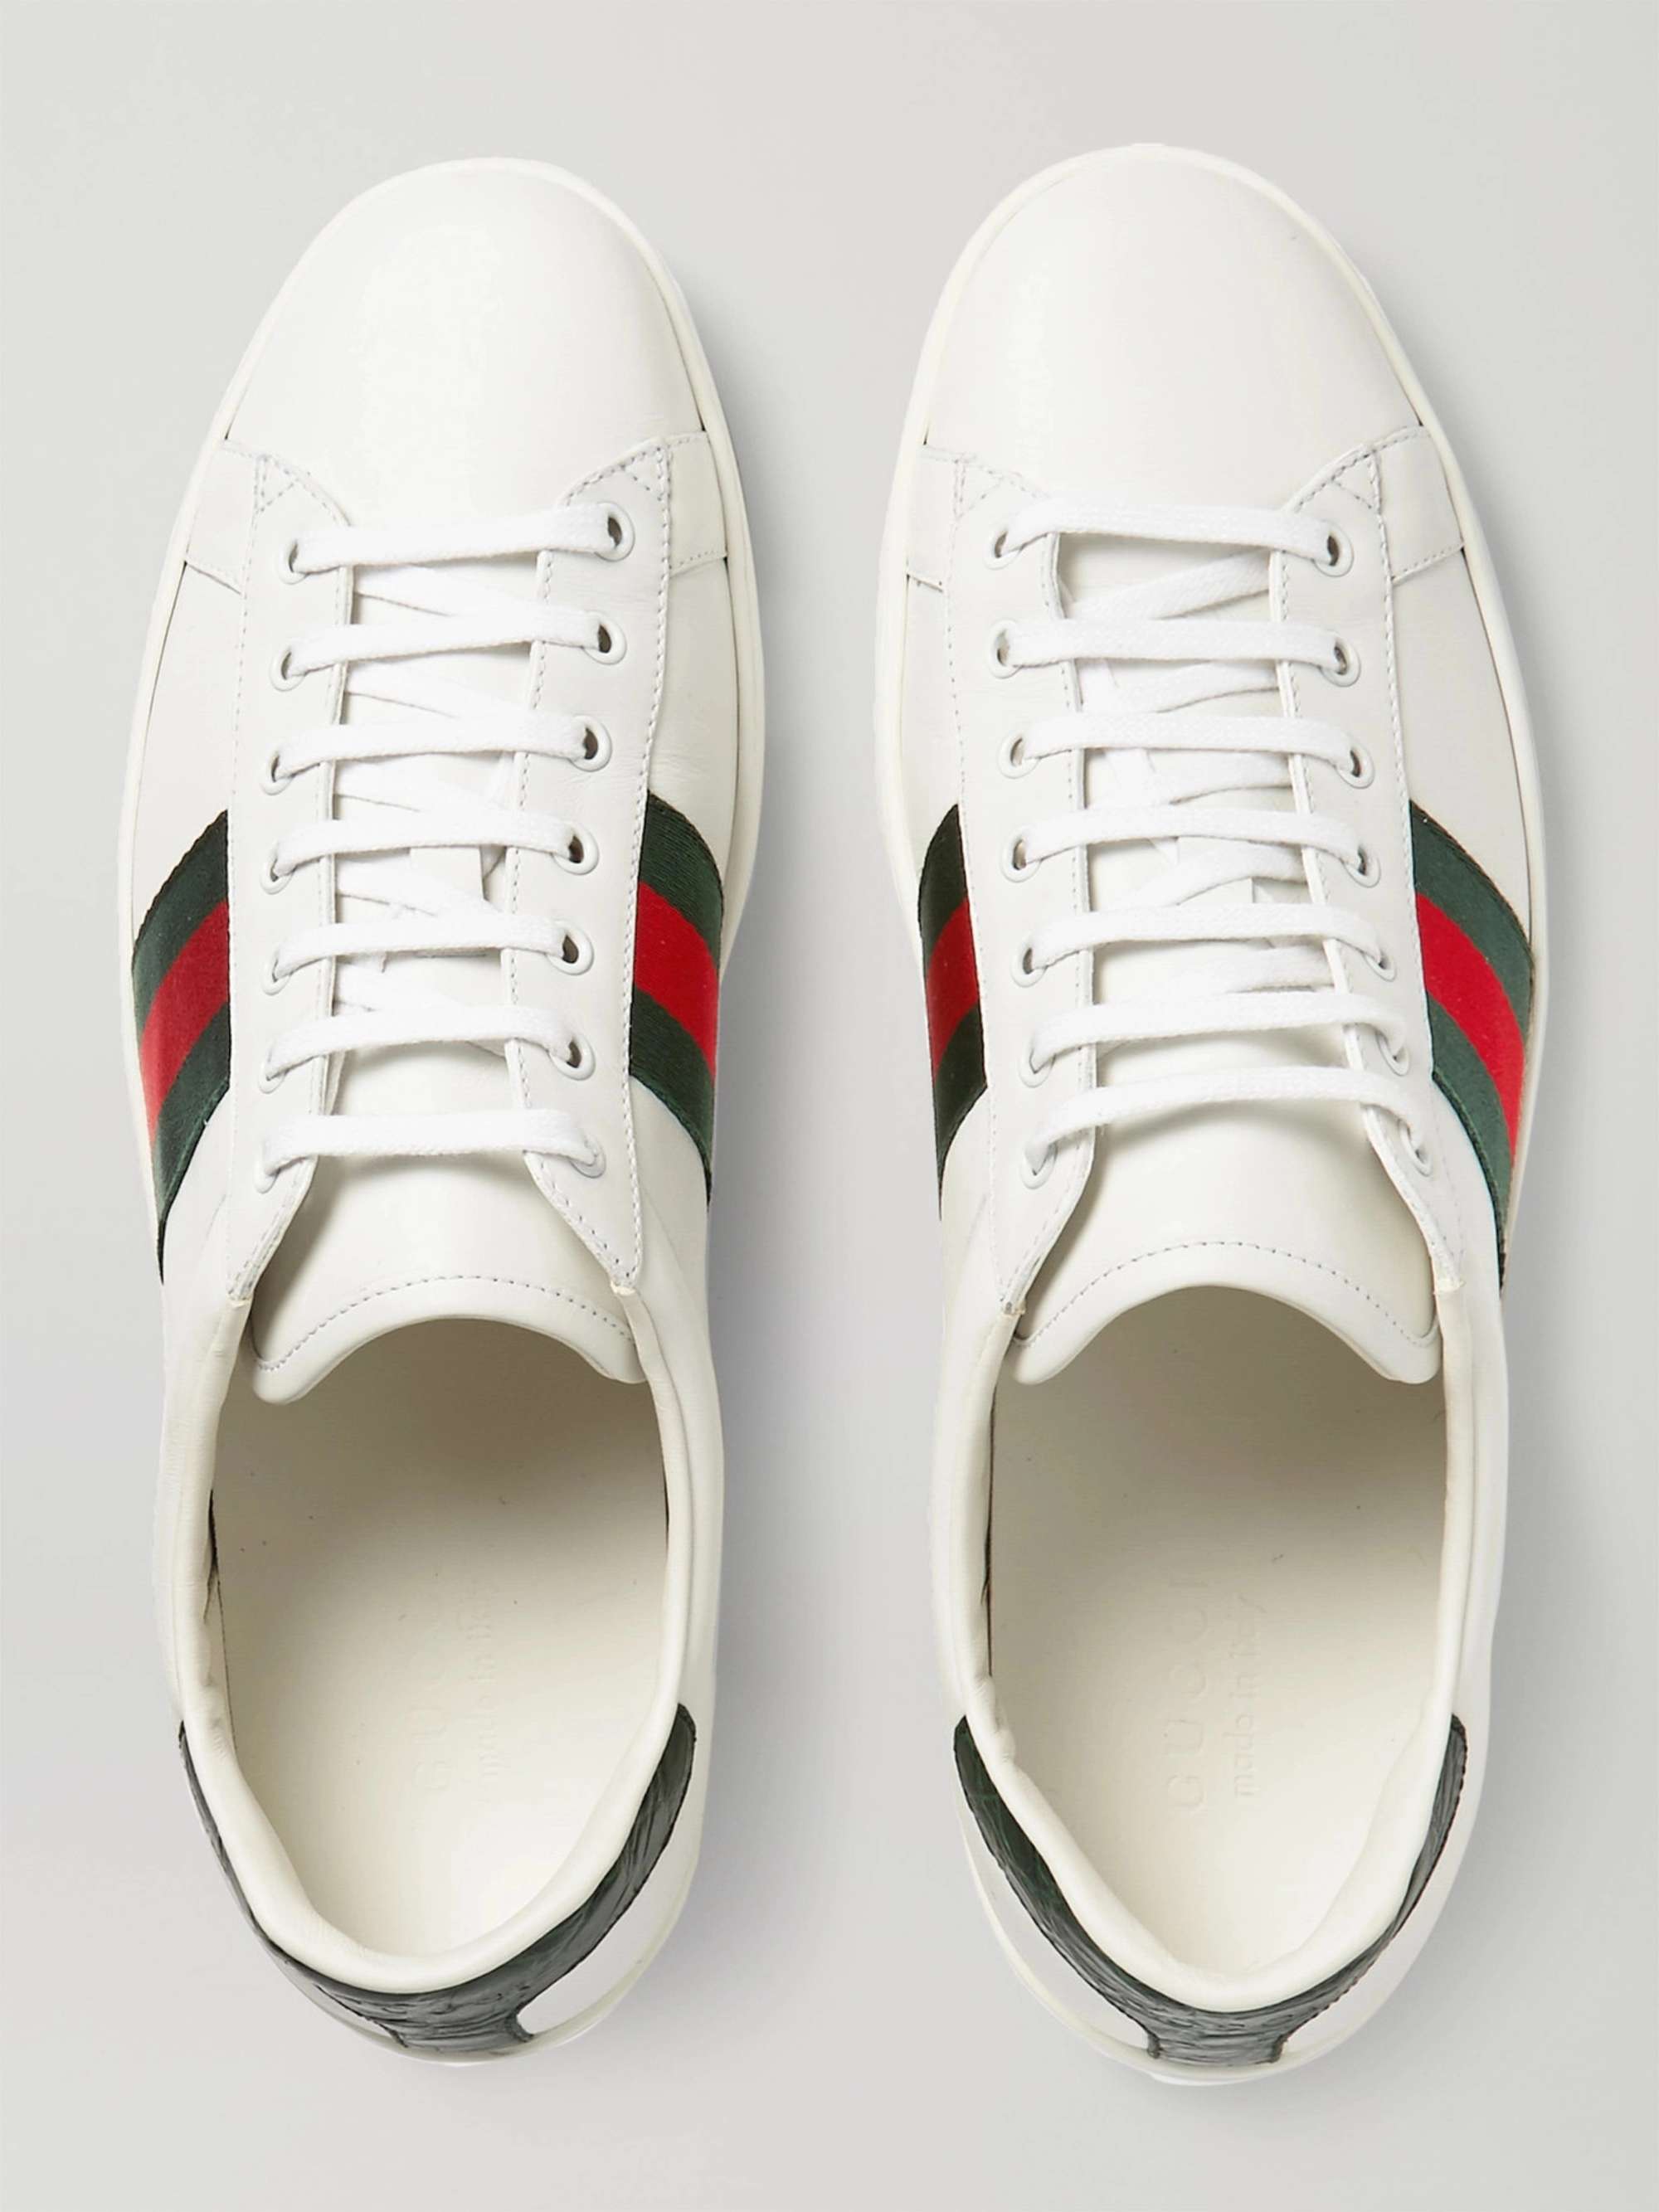 GUCCI Ace Crocodile-Trimmed Leather Sneakers | MR PORTER